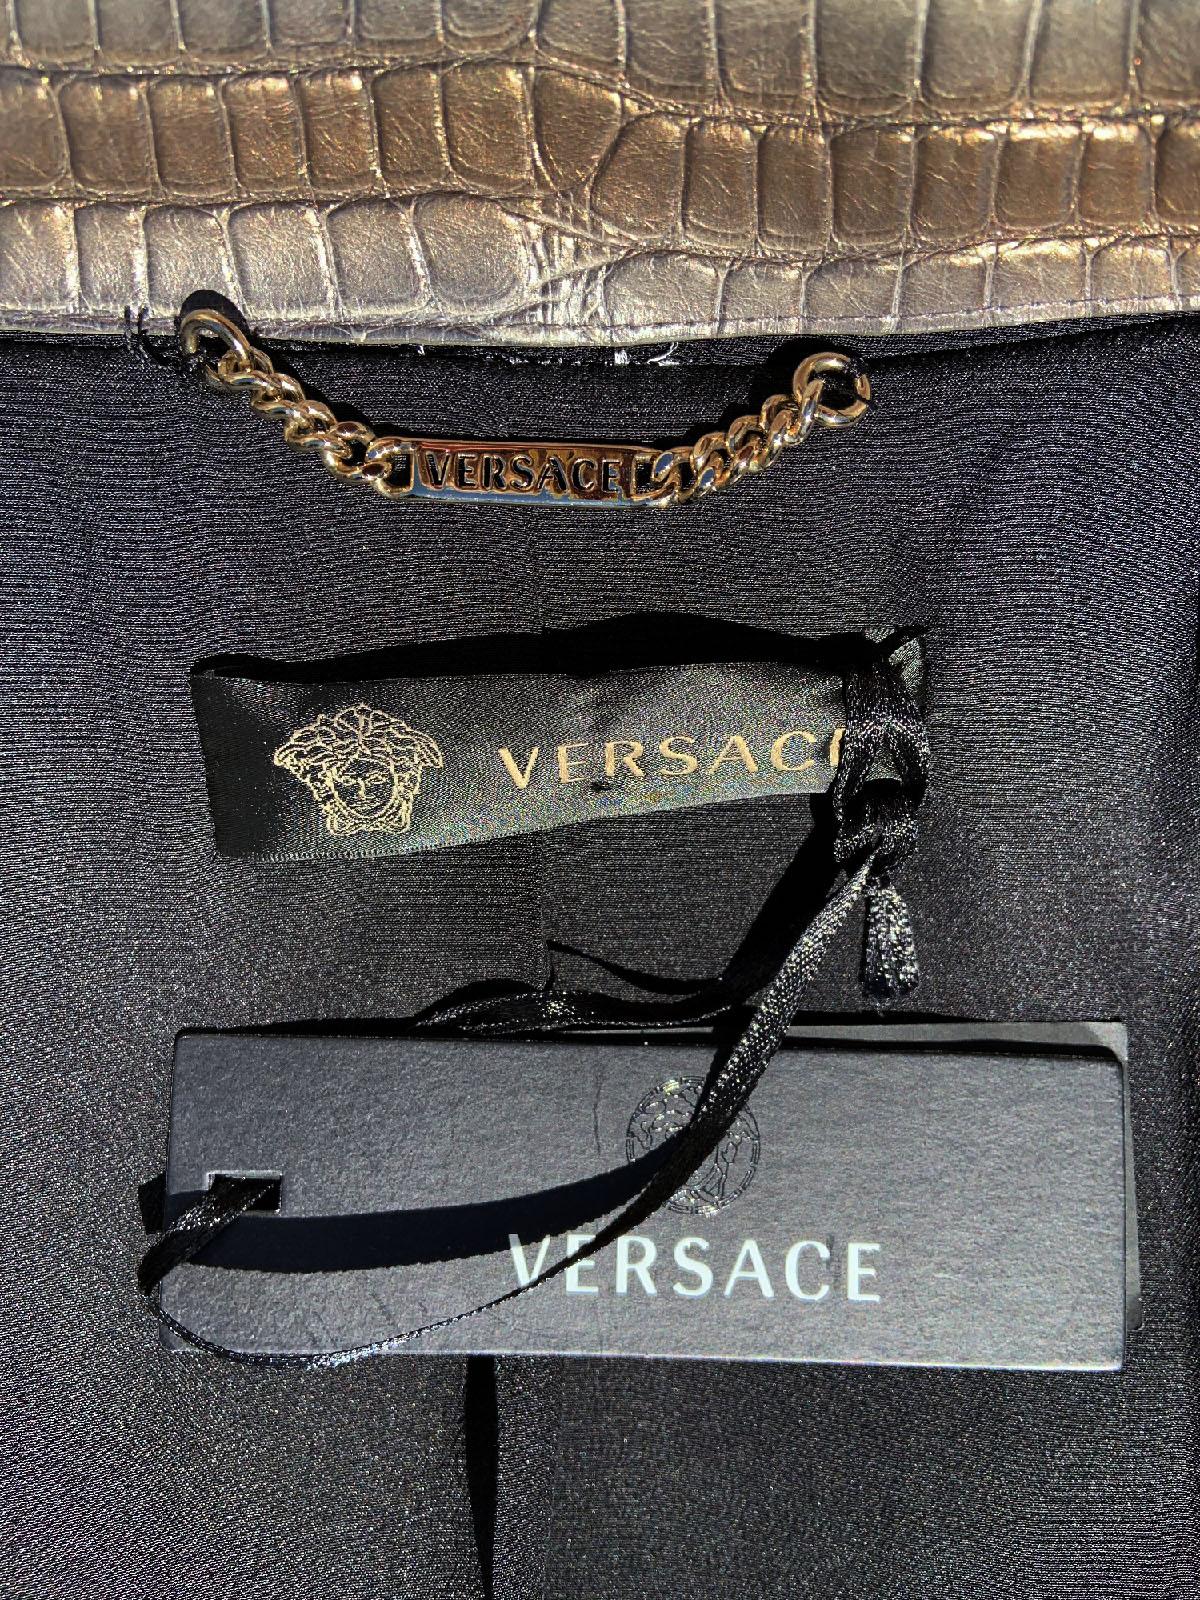 New Versace Black Wool Leather Crocodile Pattern Fitted Coat It 38 - US 4 For Sale 3